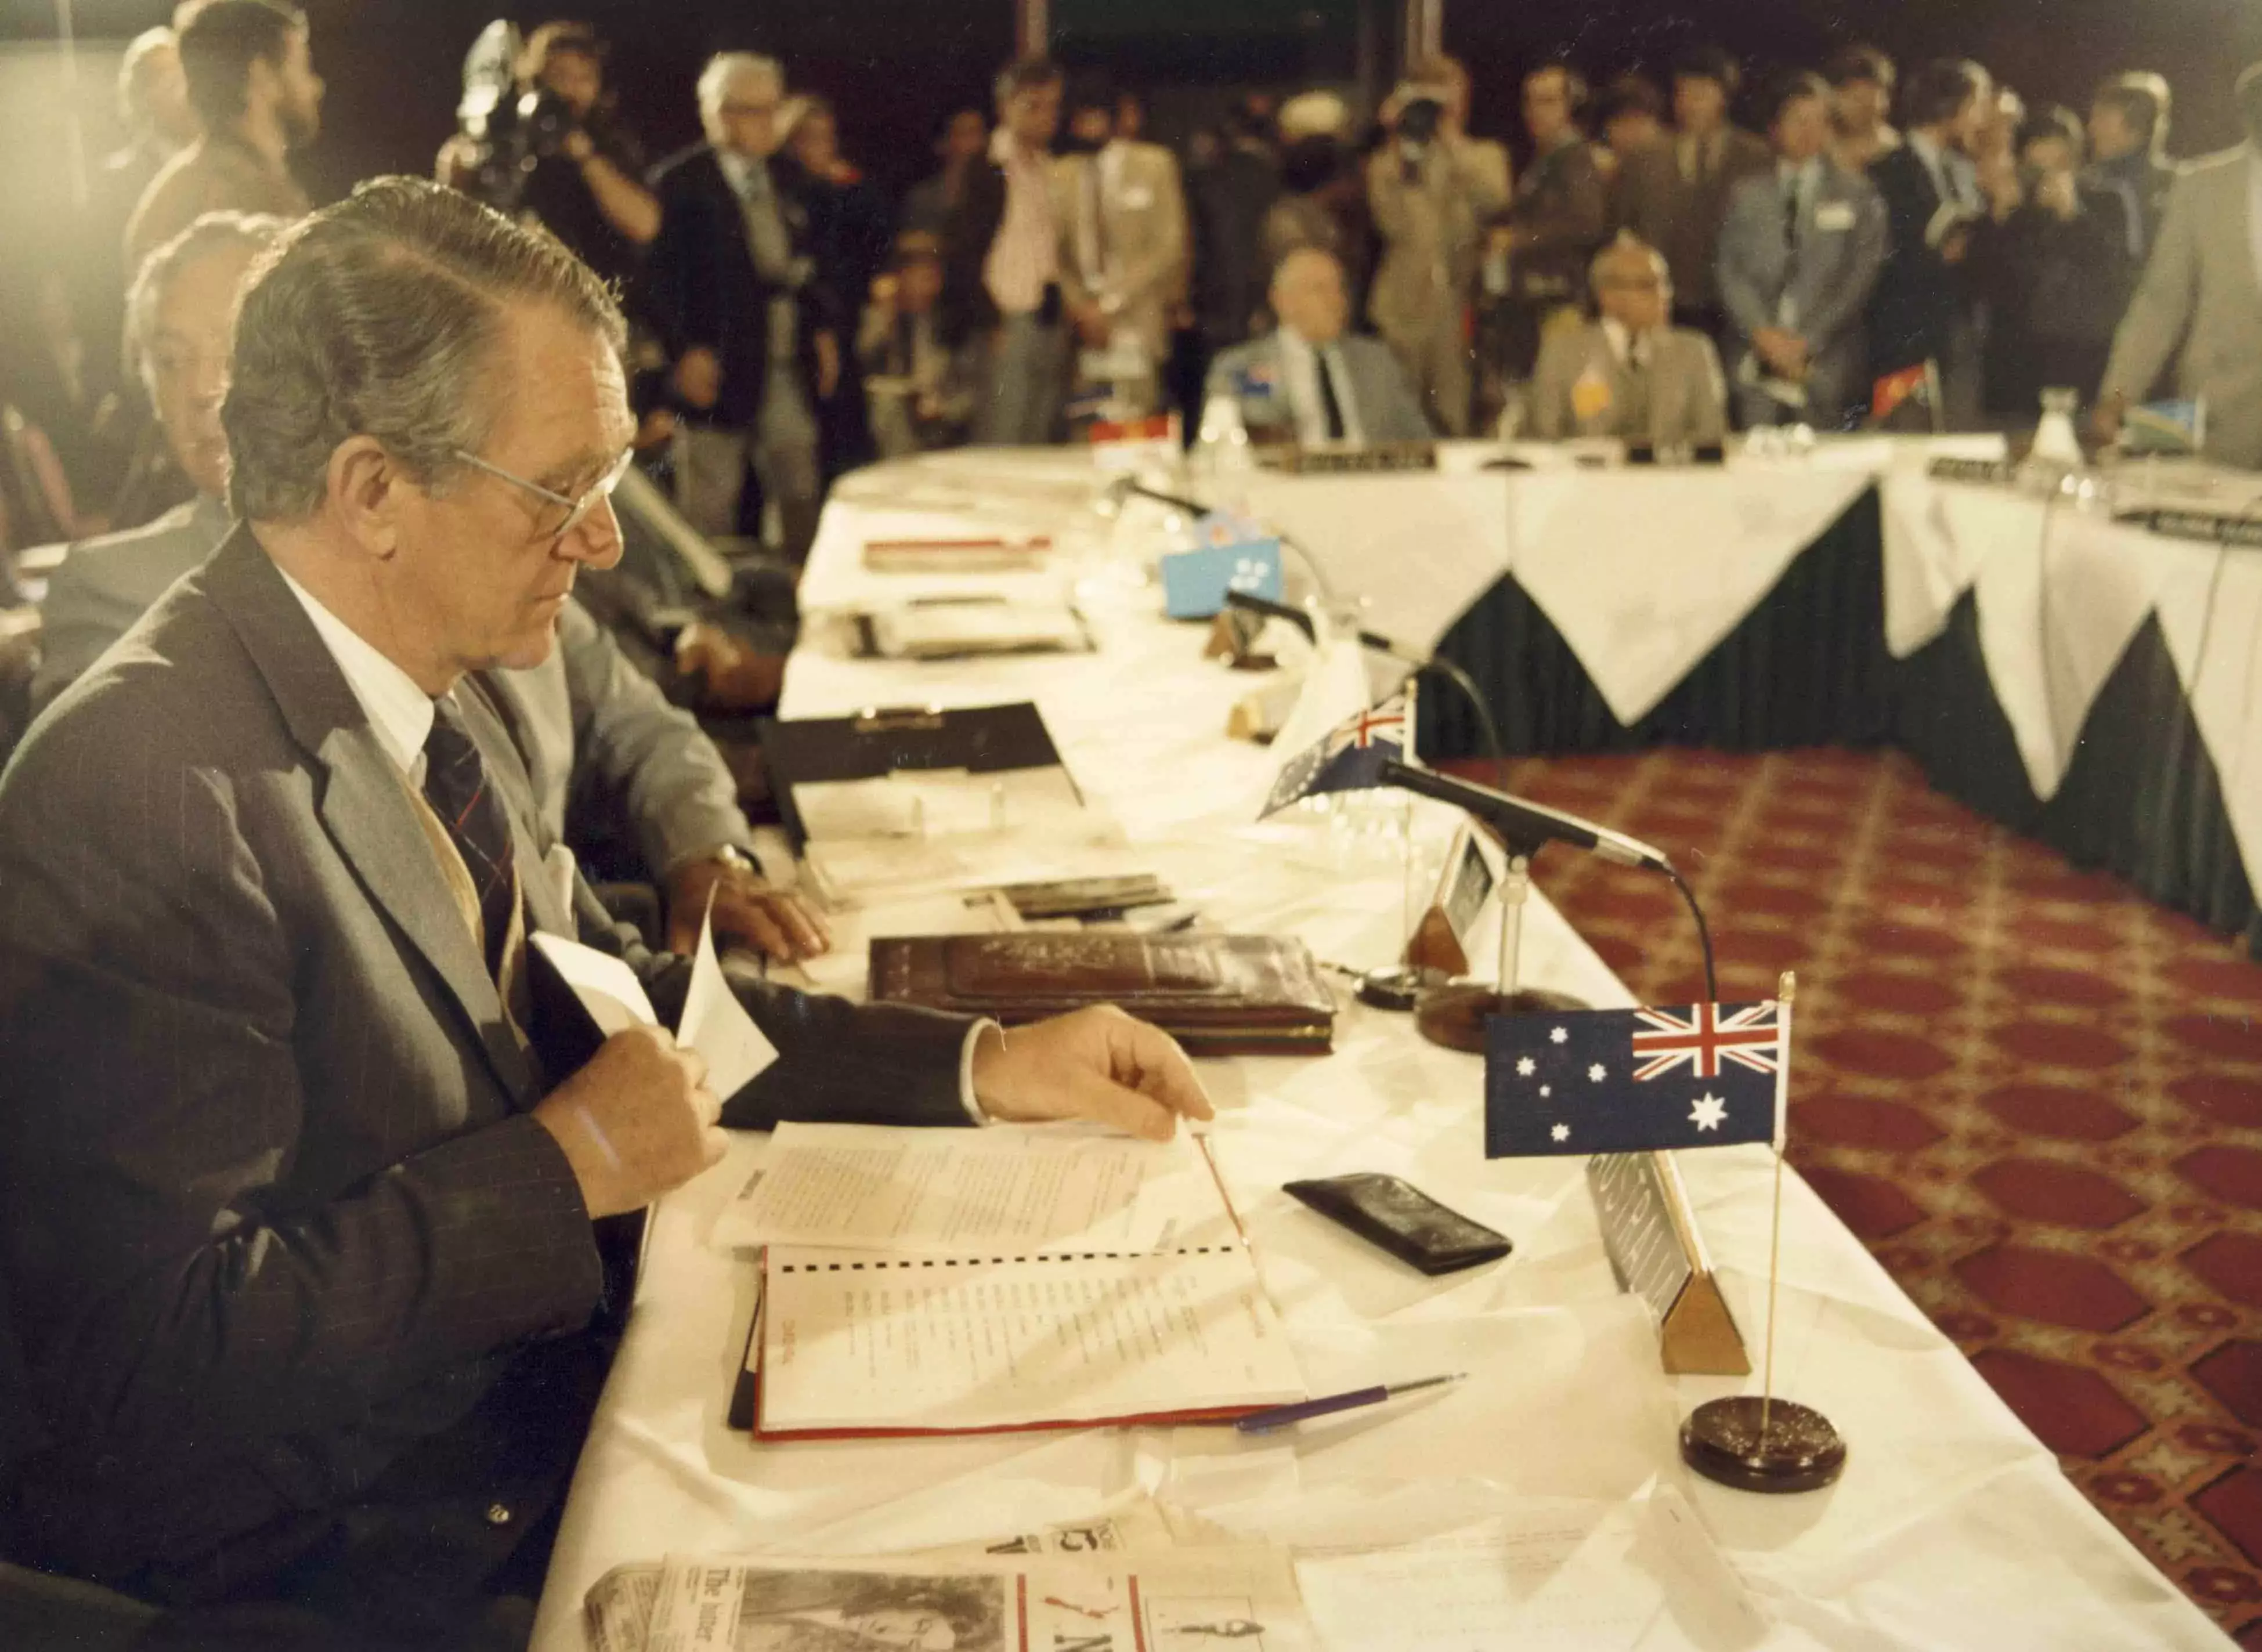 Malcolm Fraser sits at the end of a long U-Shaped table with a pile of papers in front of him that he reads. There is a small Australian flag on the table. The entire table is filled with people also looking at documents.  